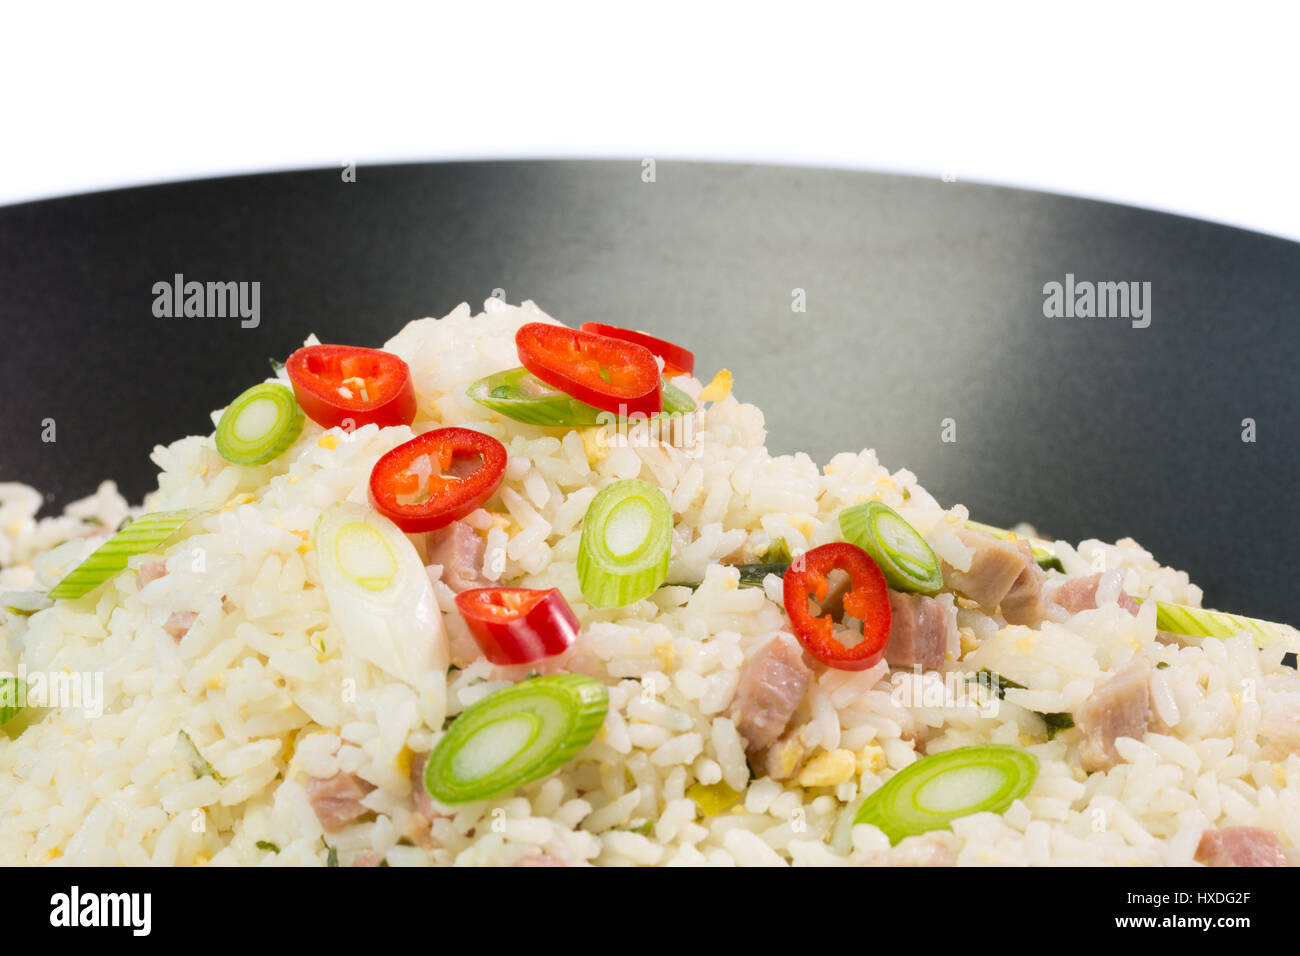 Indonesian Nasi Goreng (fried rice) with a garnish of red pepper and spring onion Stock Photo